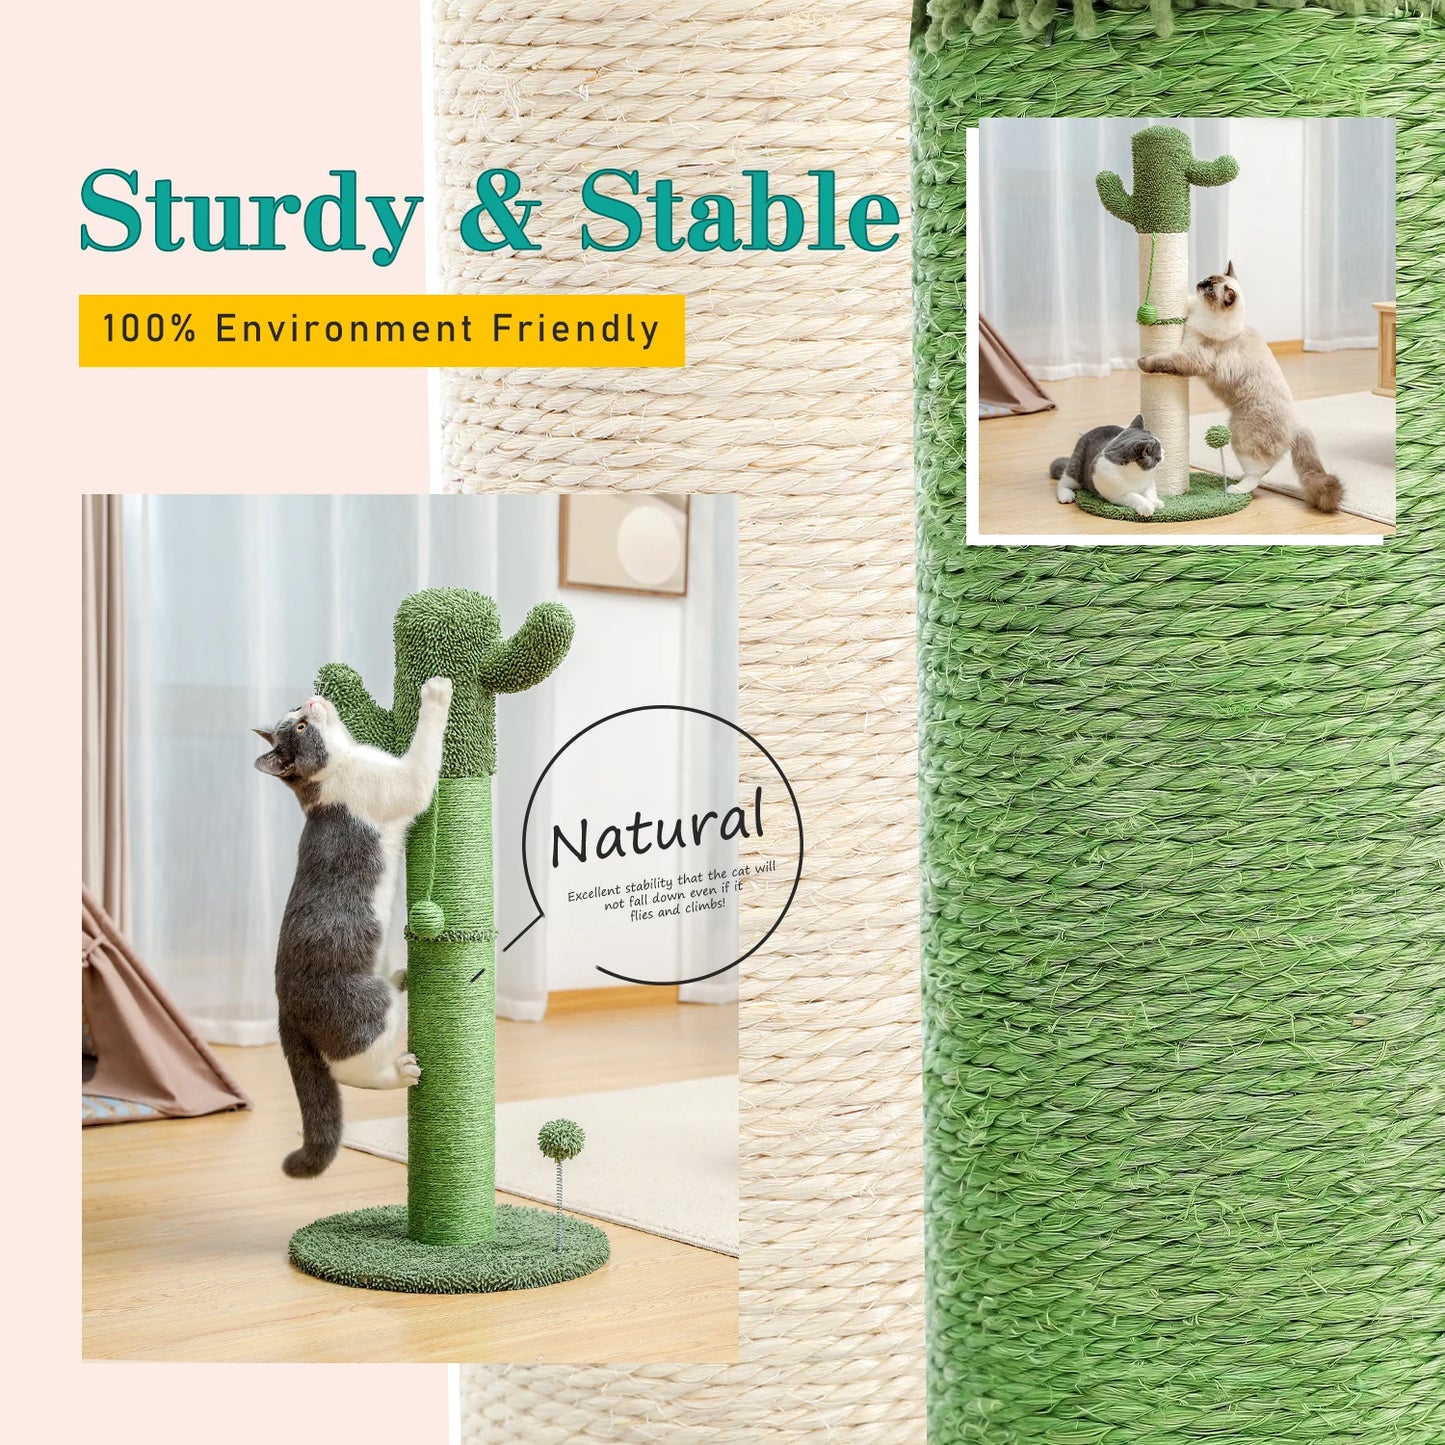 Adorable Cactus Cat Tree Collection - Available in 68cm, 70cm, 85cm, 93.5cm with Play Features